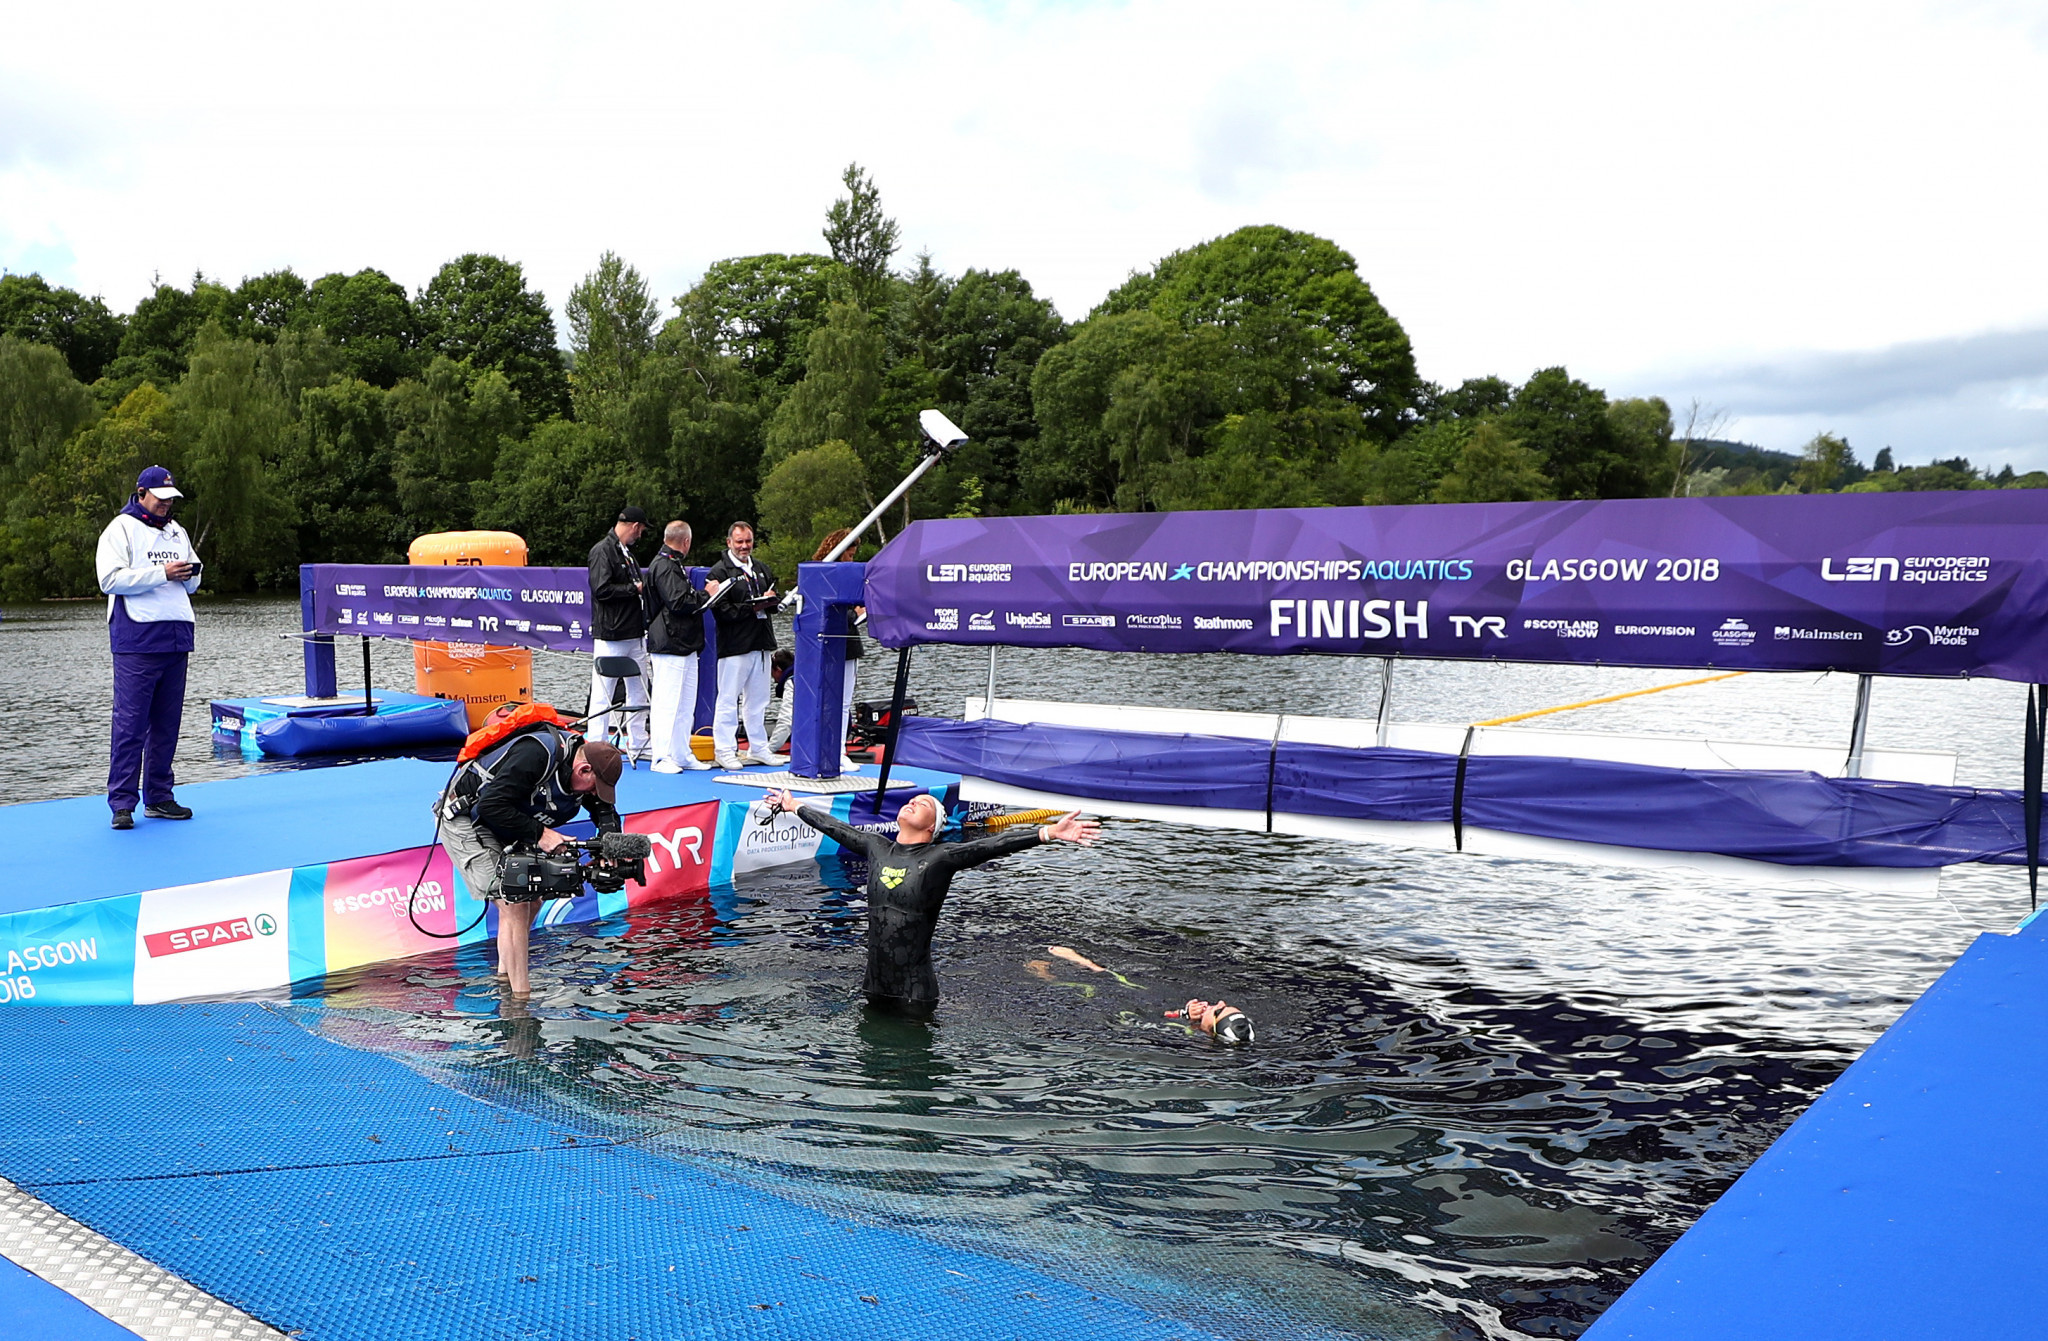 The Netherlands Sharon van Rouwendaal held off the challenge of Italy's Giulia Gabrielleschi in the 10km open water event in Loch Lomond to complete a gold medal double ©Getty Images